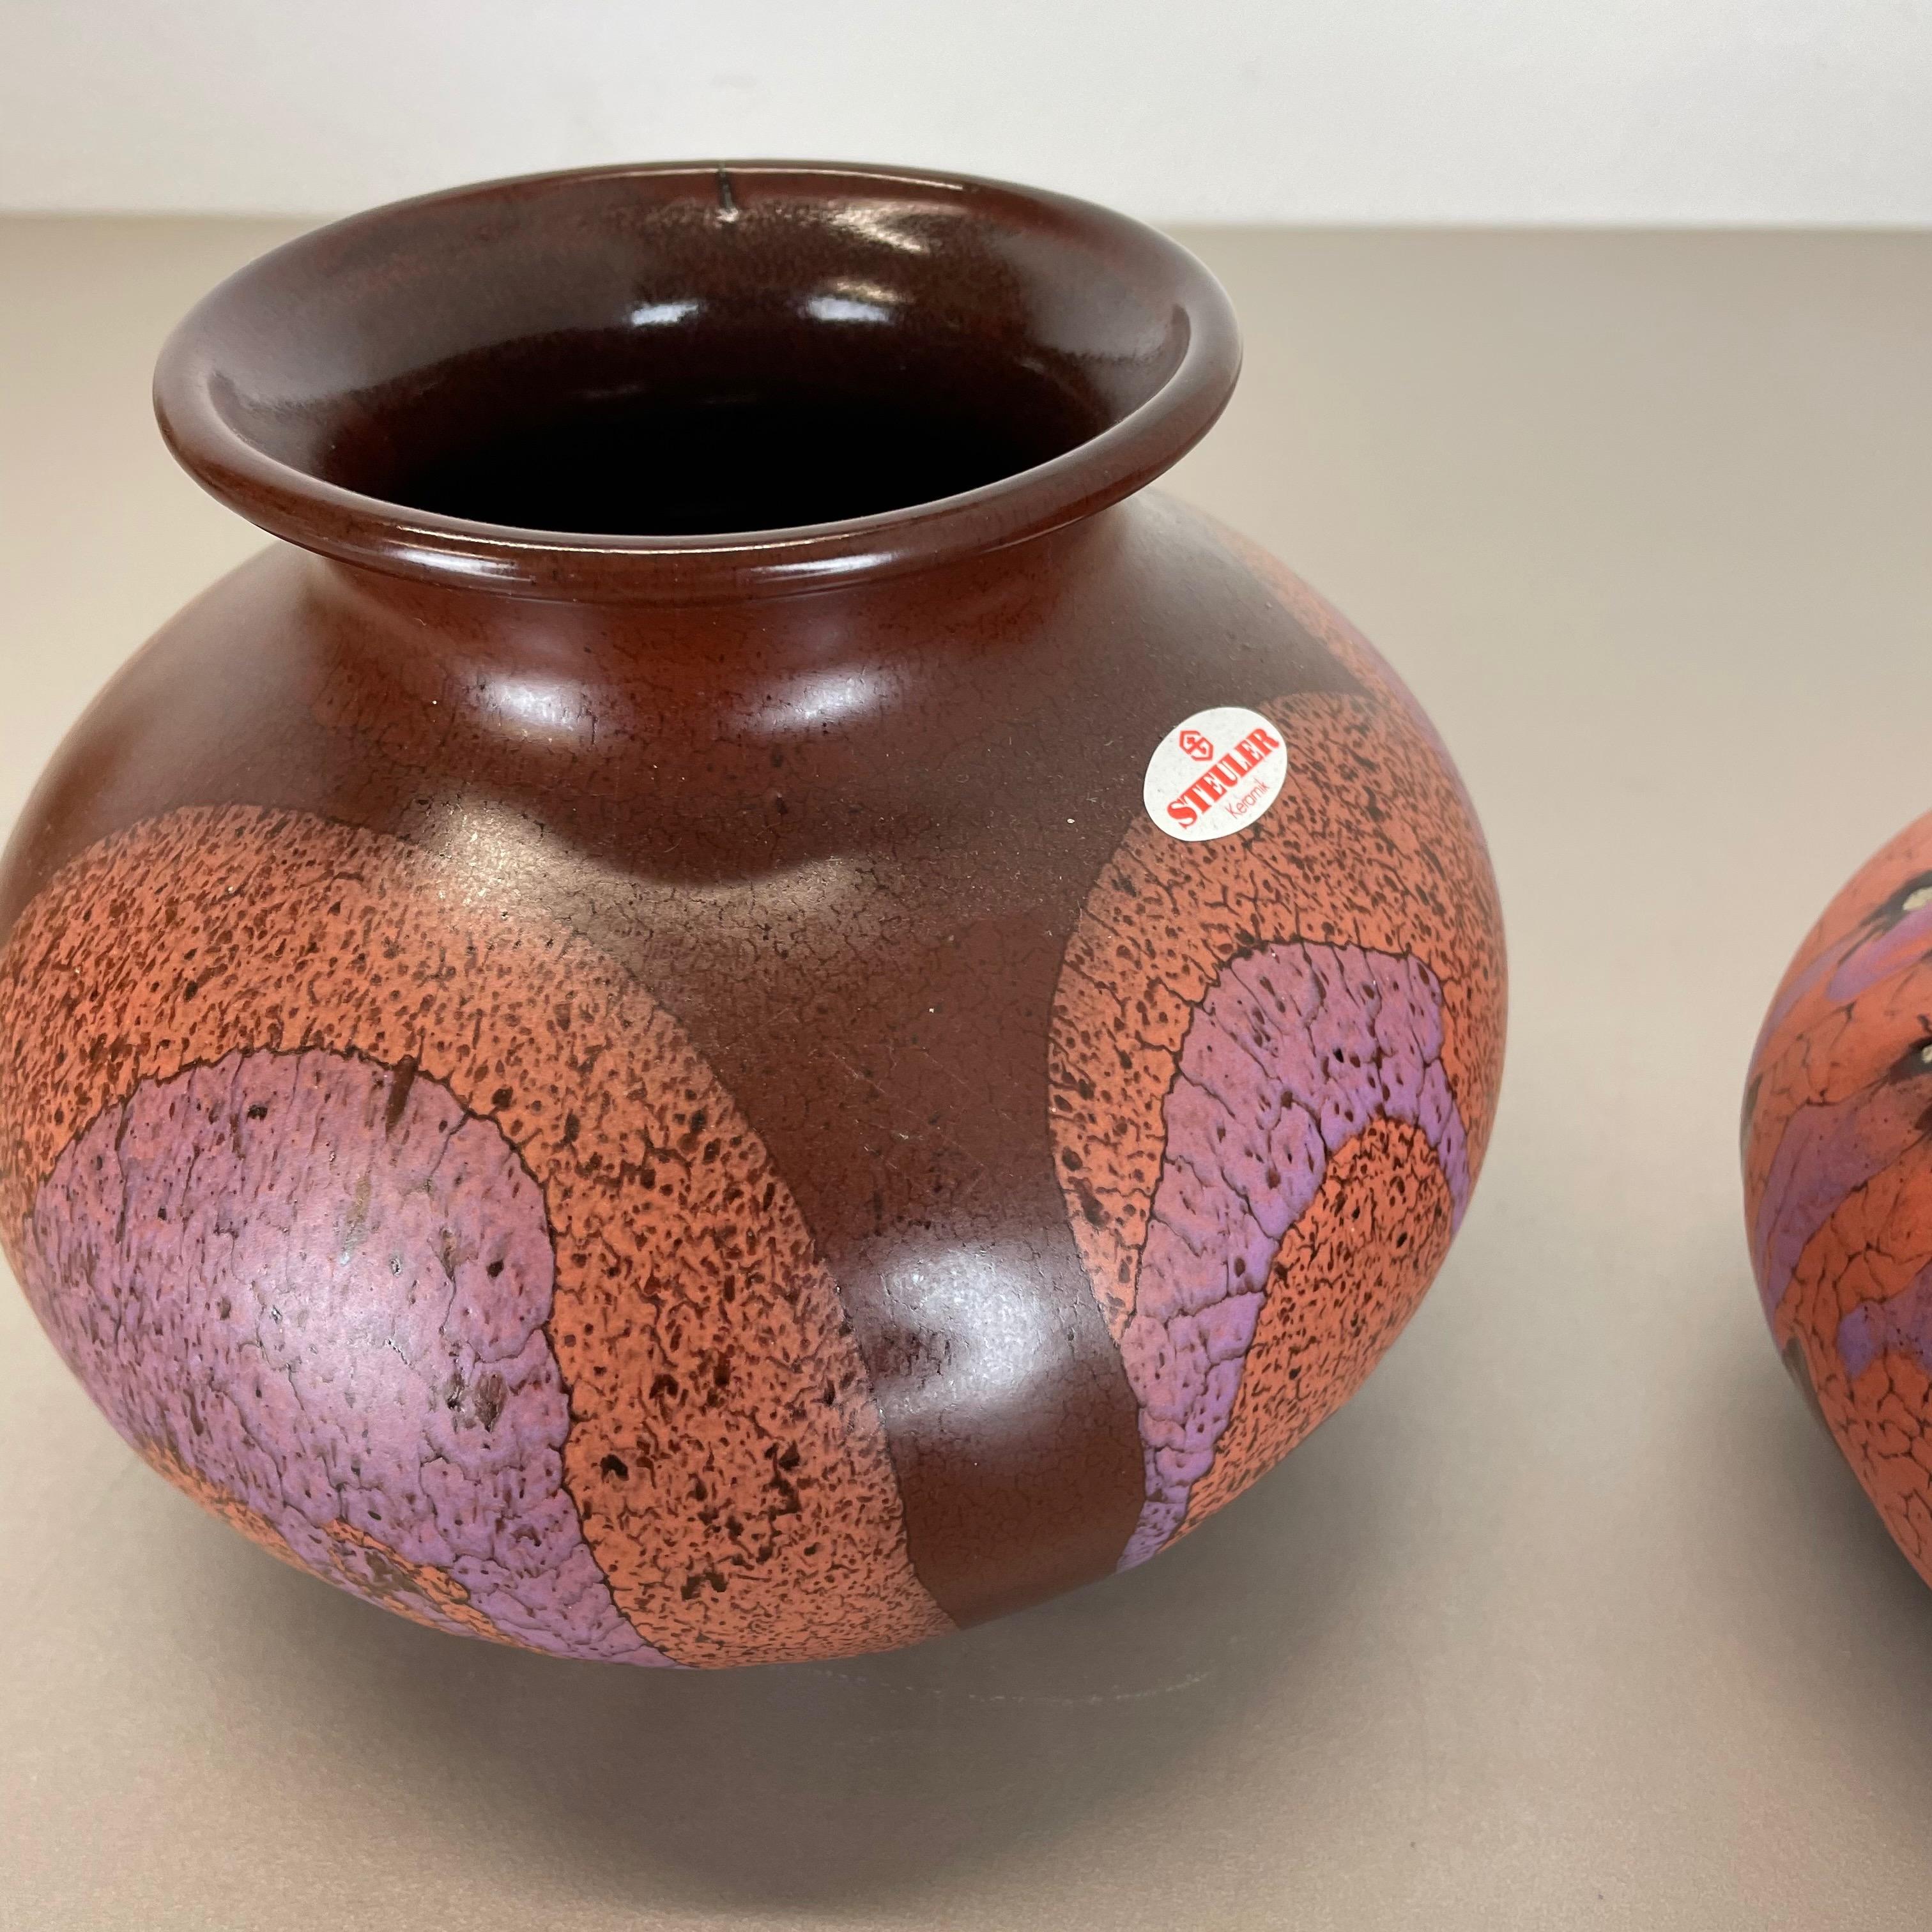 Set of Two Pottery Vases Objects by Steuler Ceramics, Germany, 1970s For Sale 3